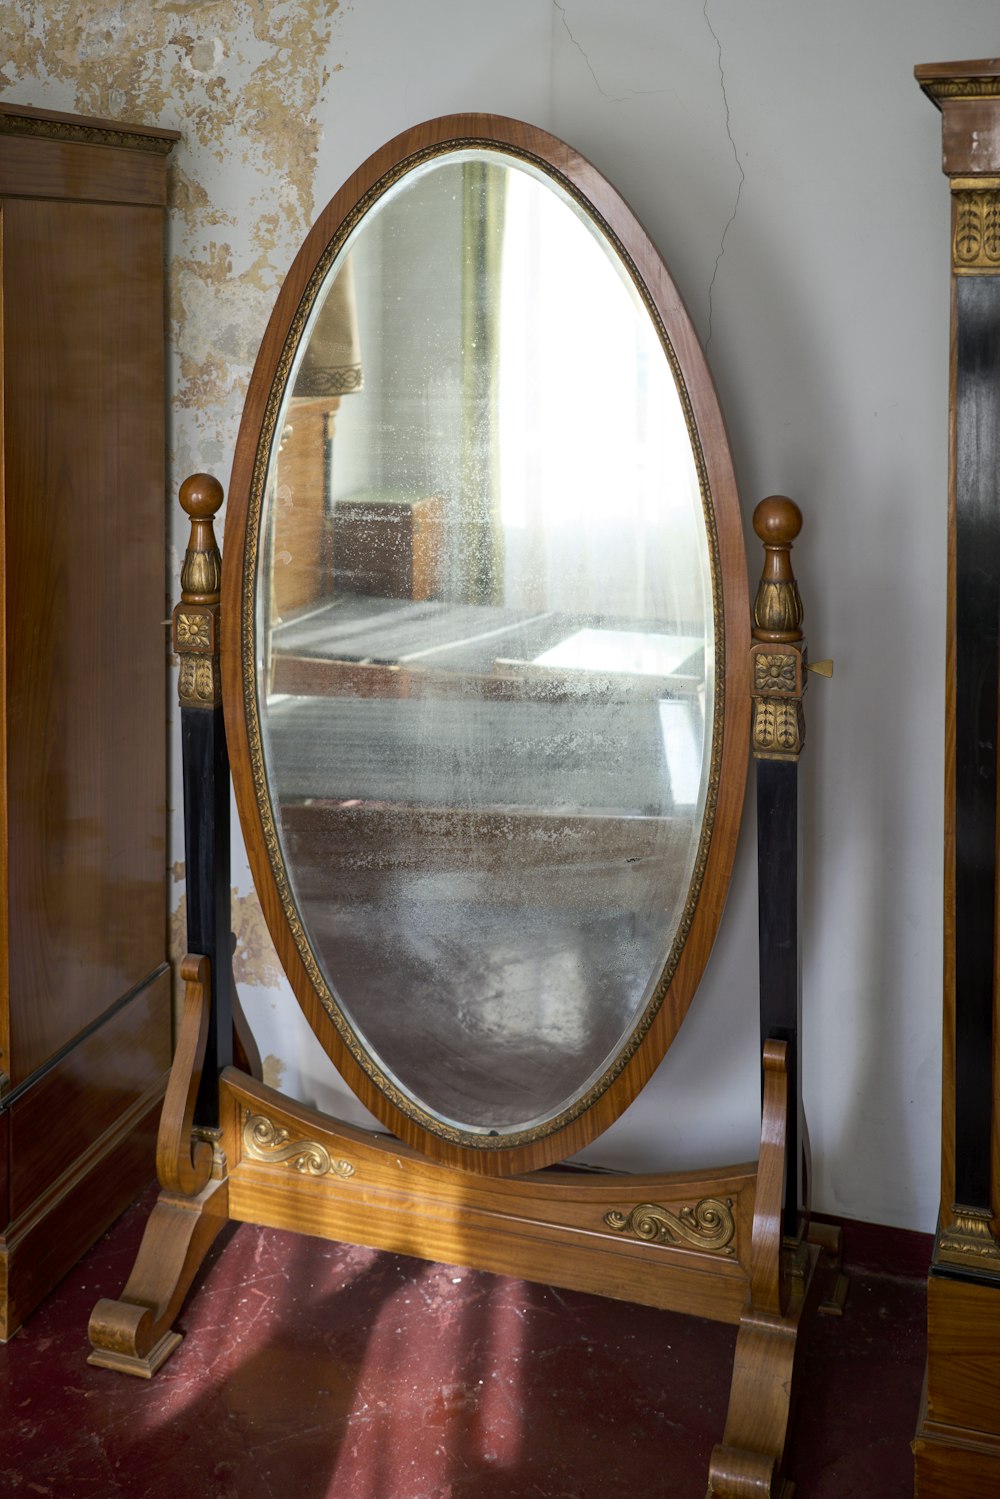 a large round mirror sitting on top of a wooden stand